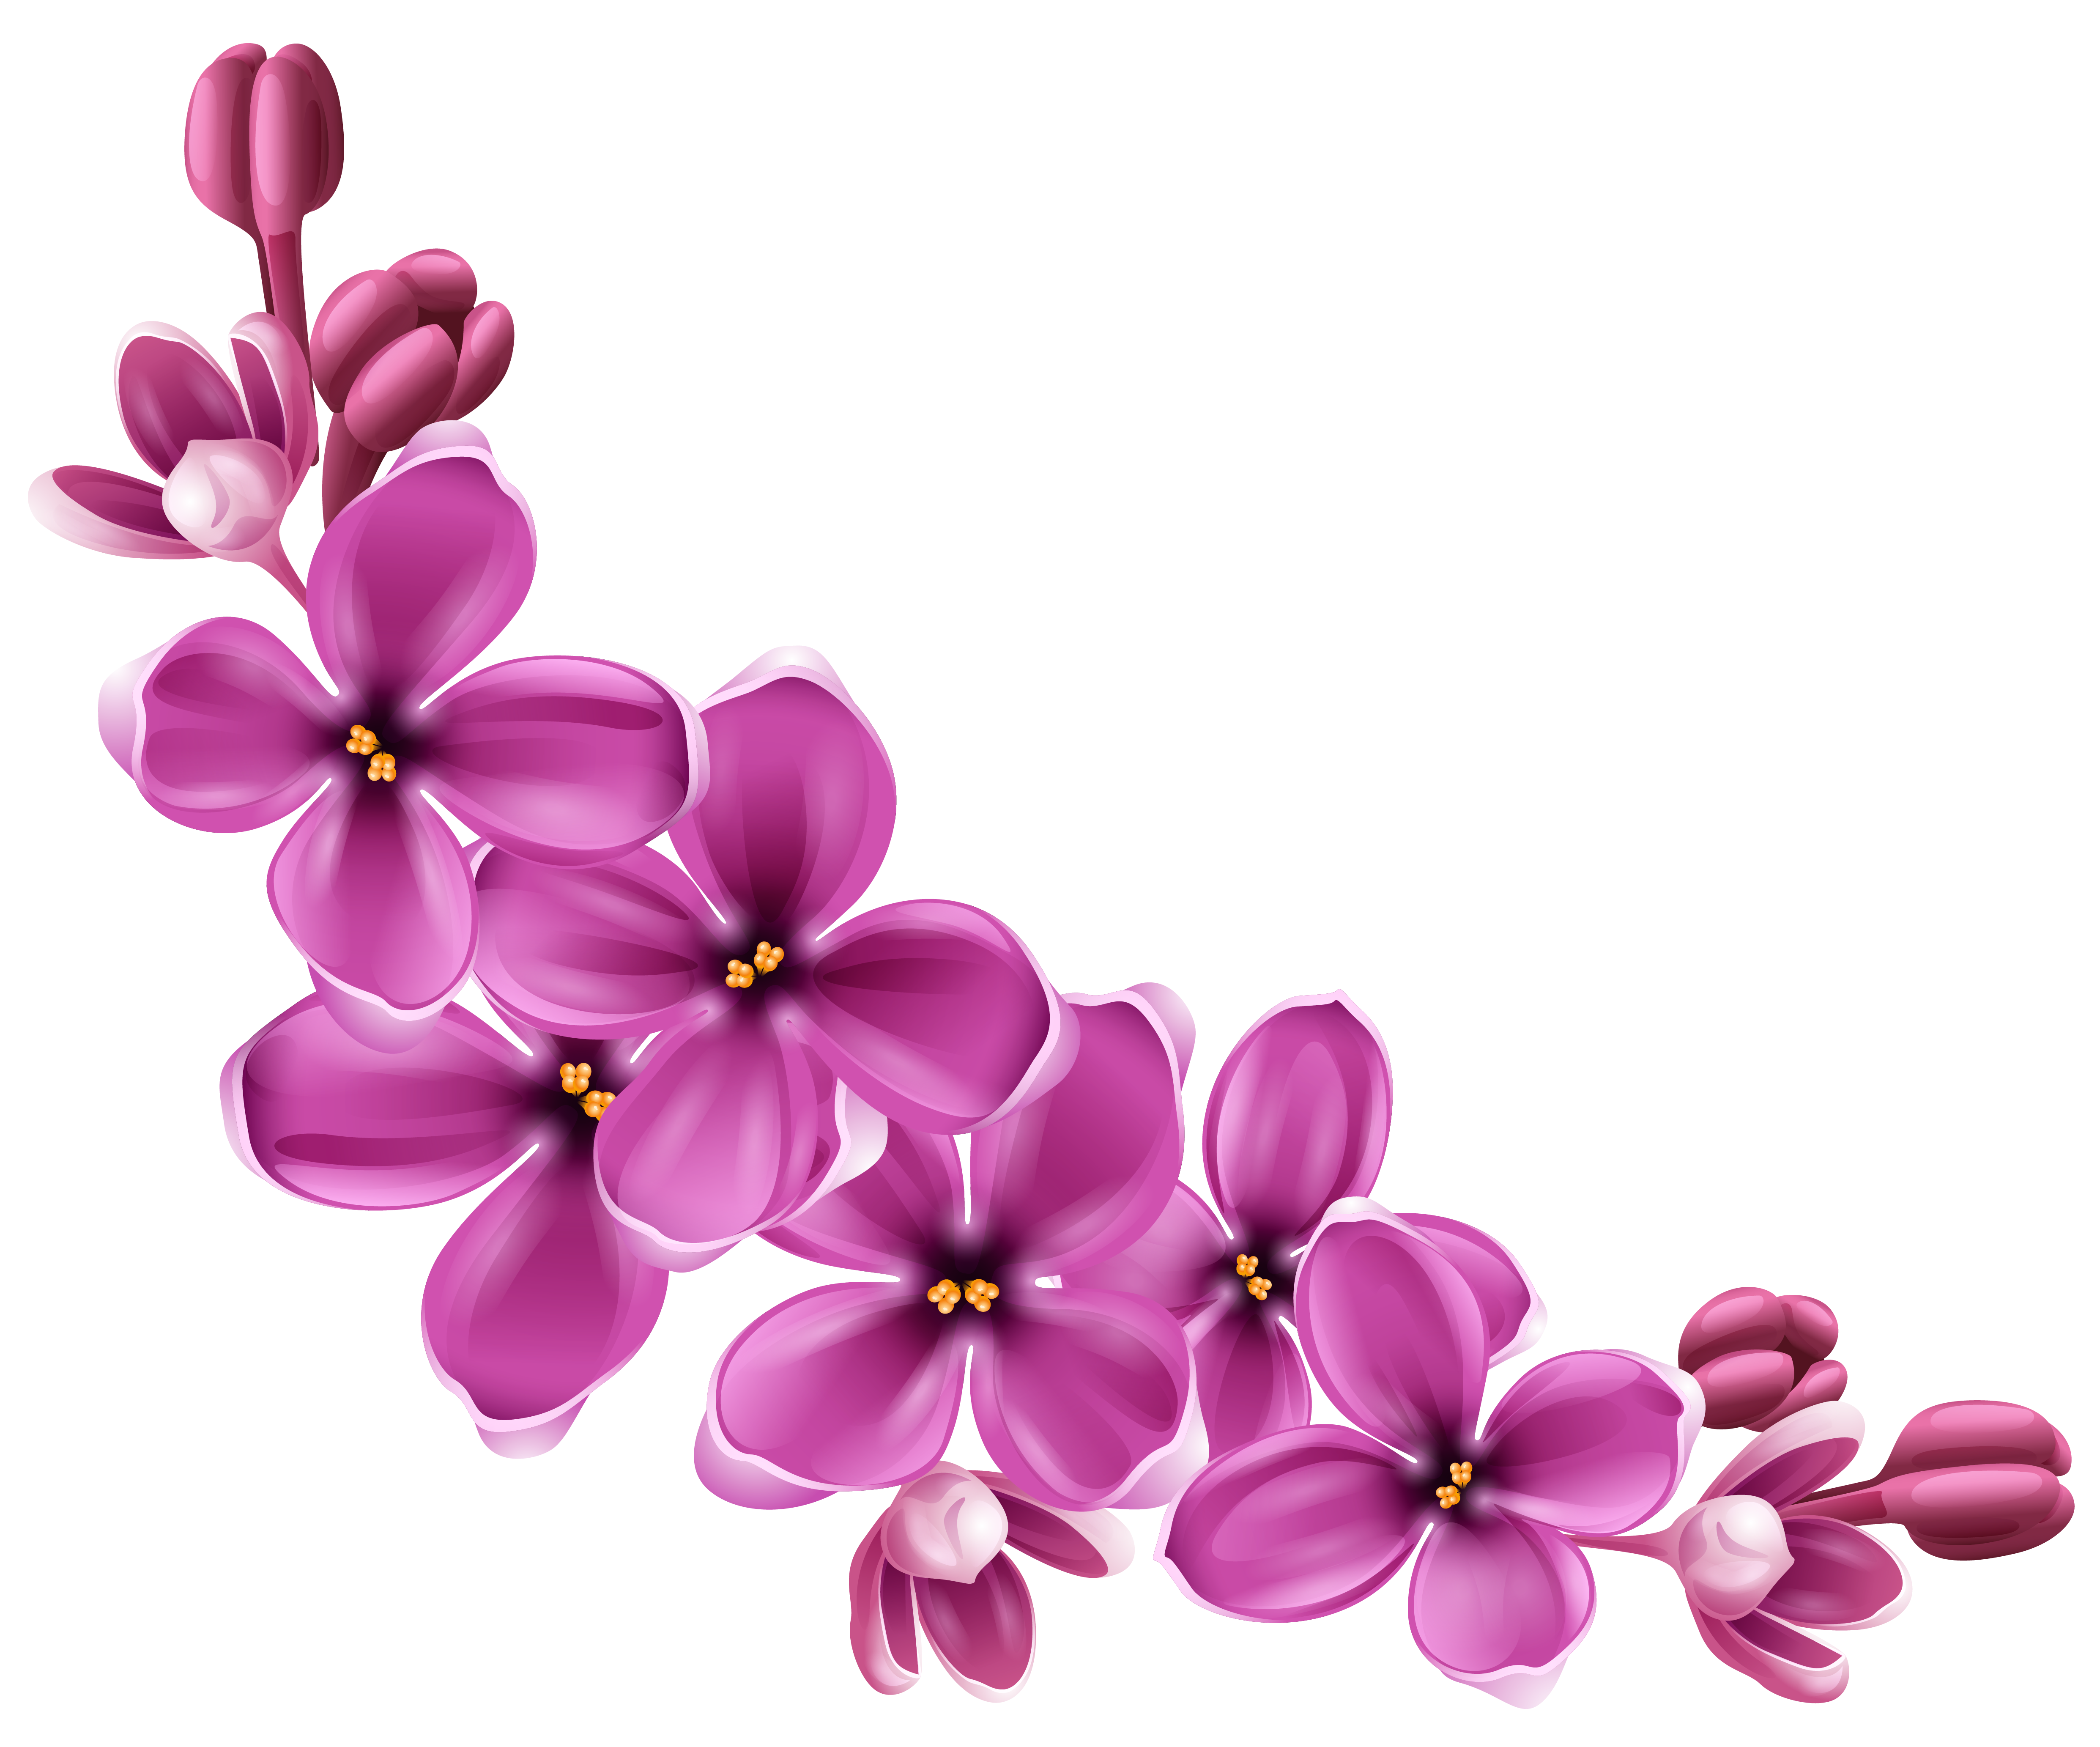 flower clipart with transparent background - photo #15